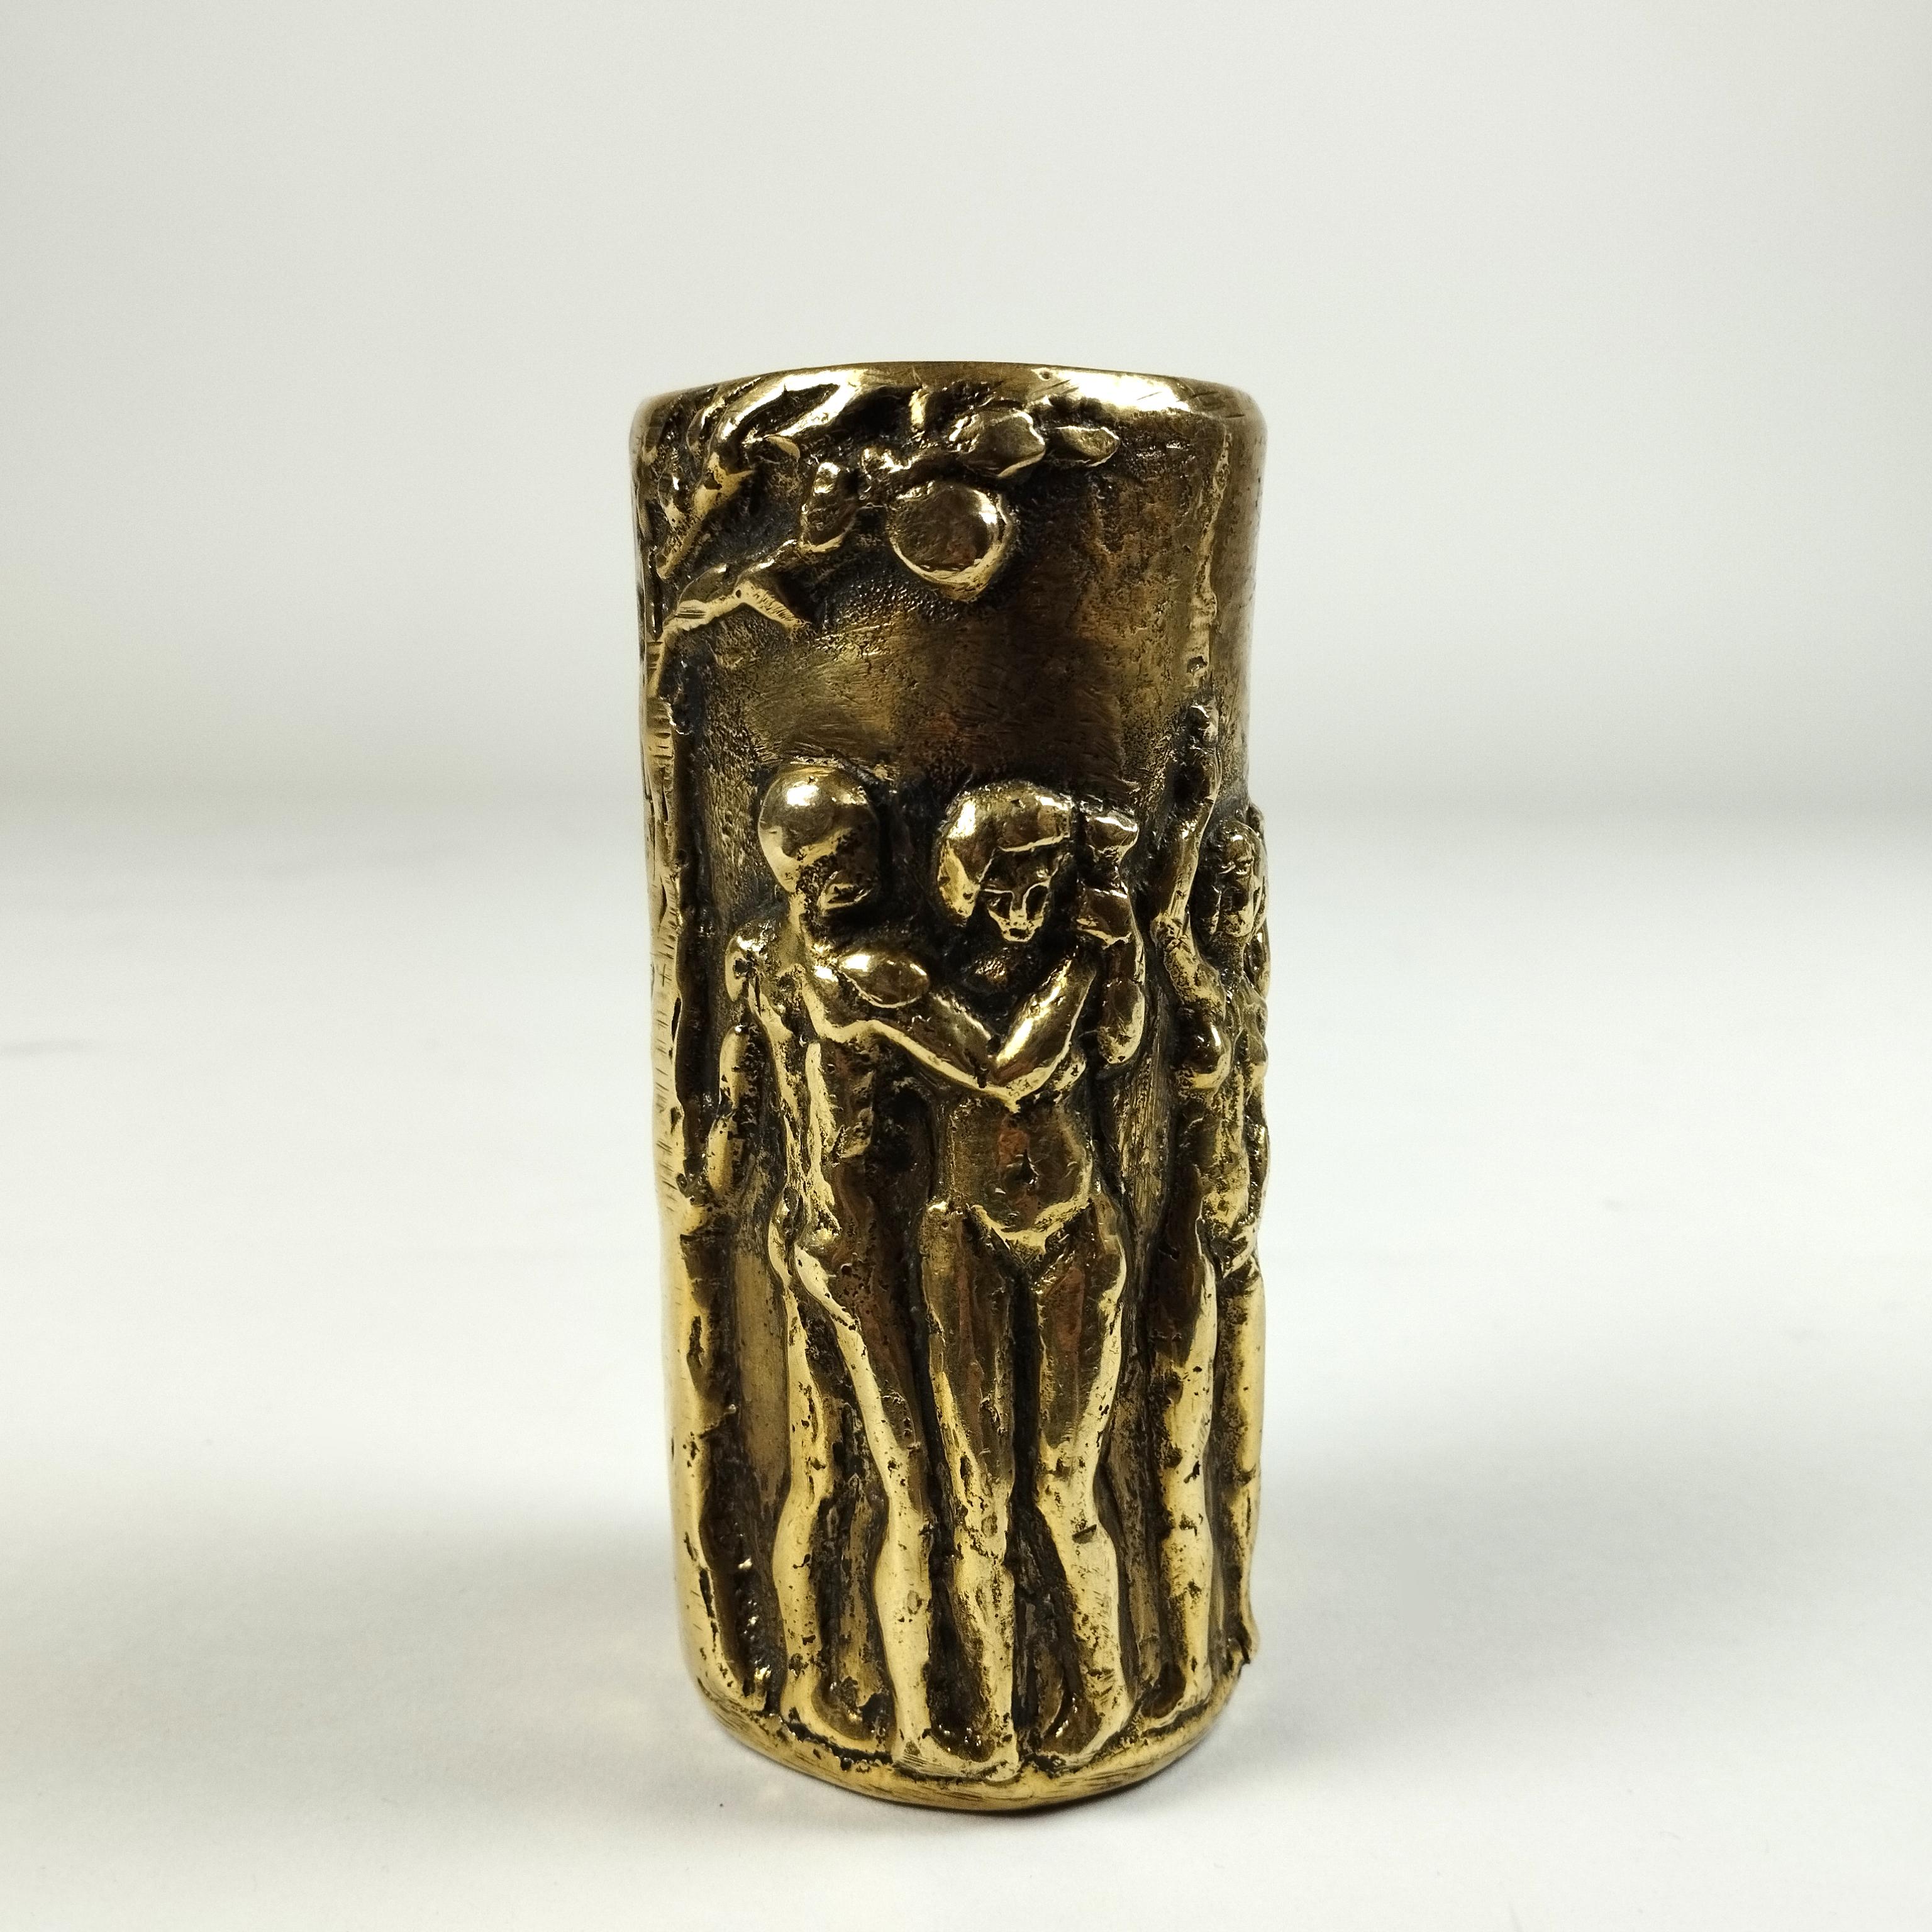 A heavy Brutalist cast bronze flower vase by Hungarian-born Mexican sculptor Pal Kepenyes. The vase shows a representation of the original sin by Adam and Eve at the Garden of Evil. The piece is signed under the Tree of Knowledge of Good and Evil's